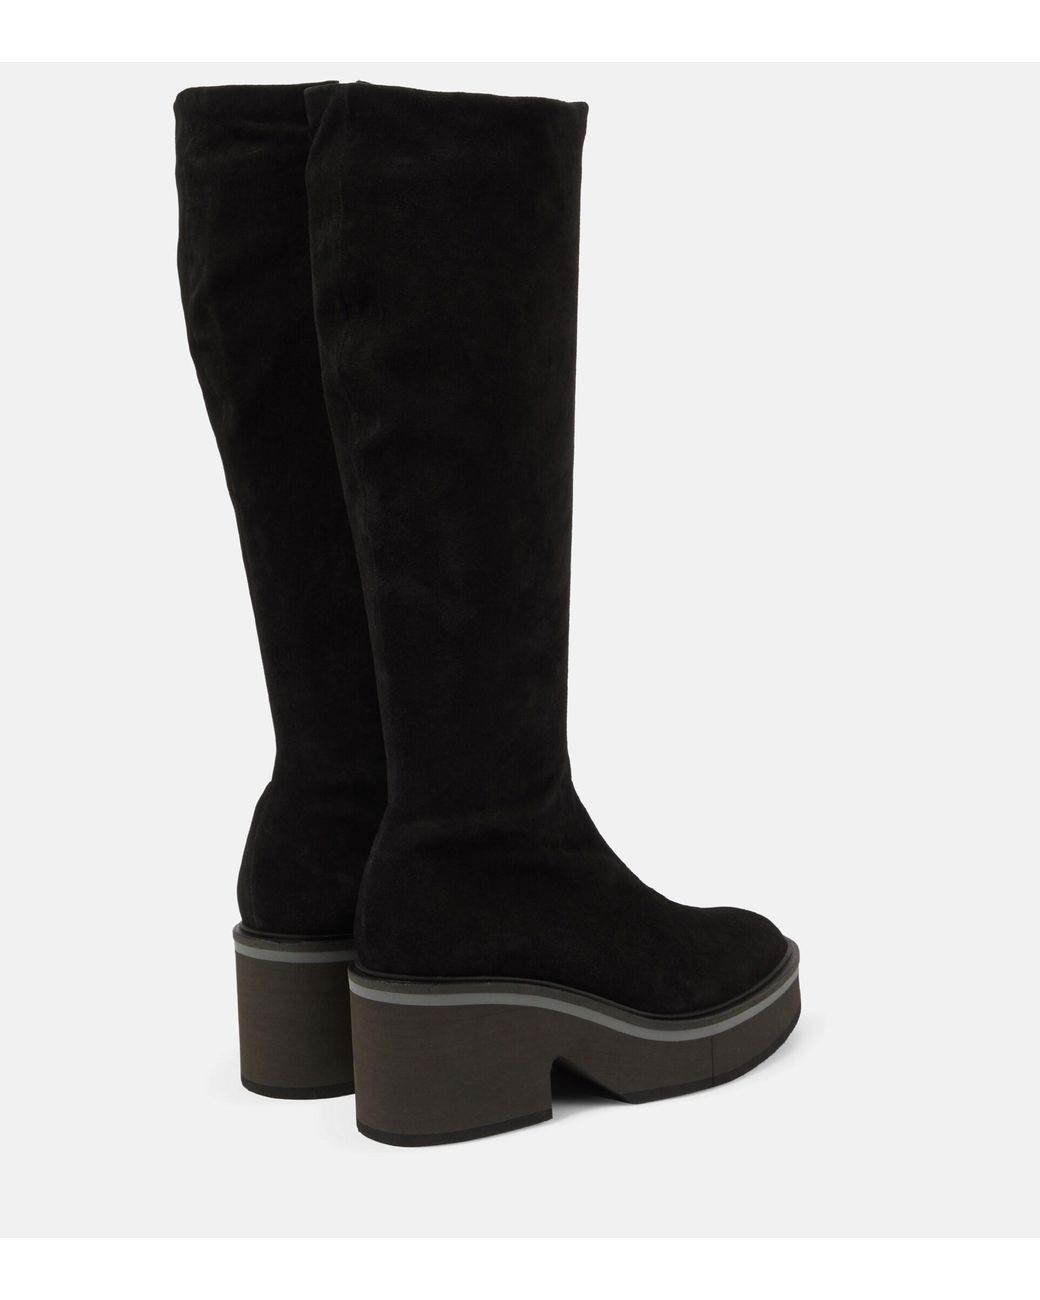 Robert Clergerie Anki Suede Knee-high Boots in Black | Lyst